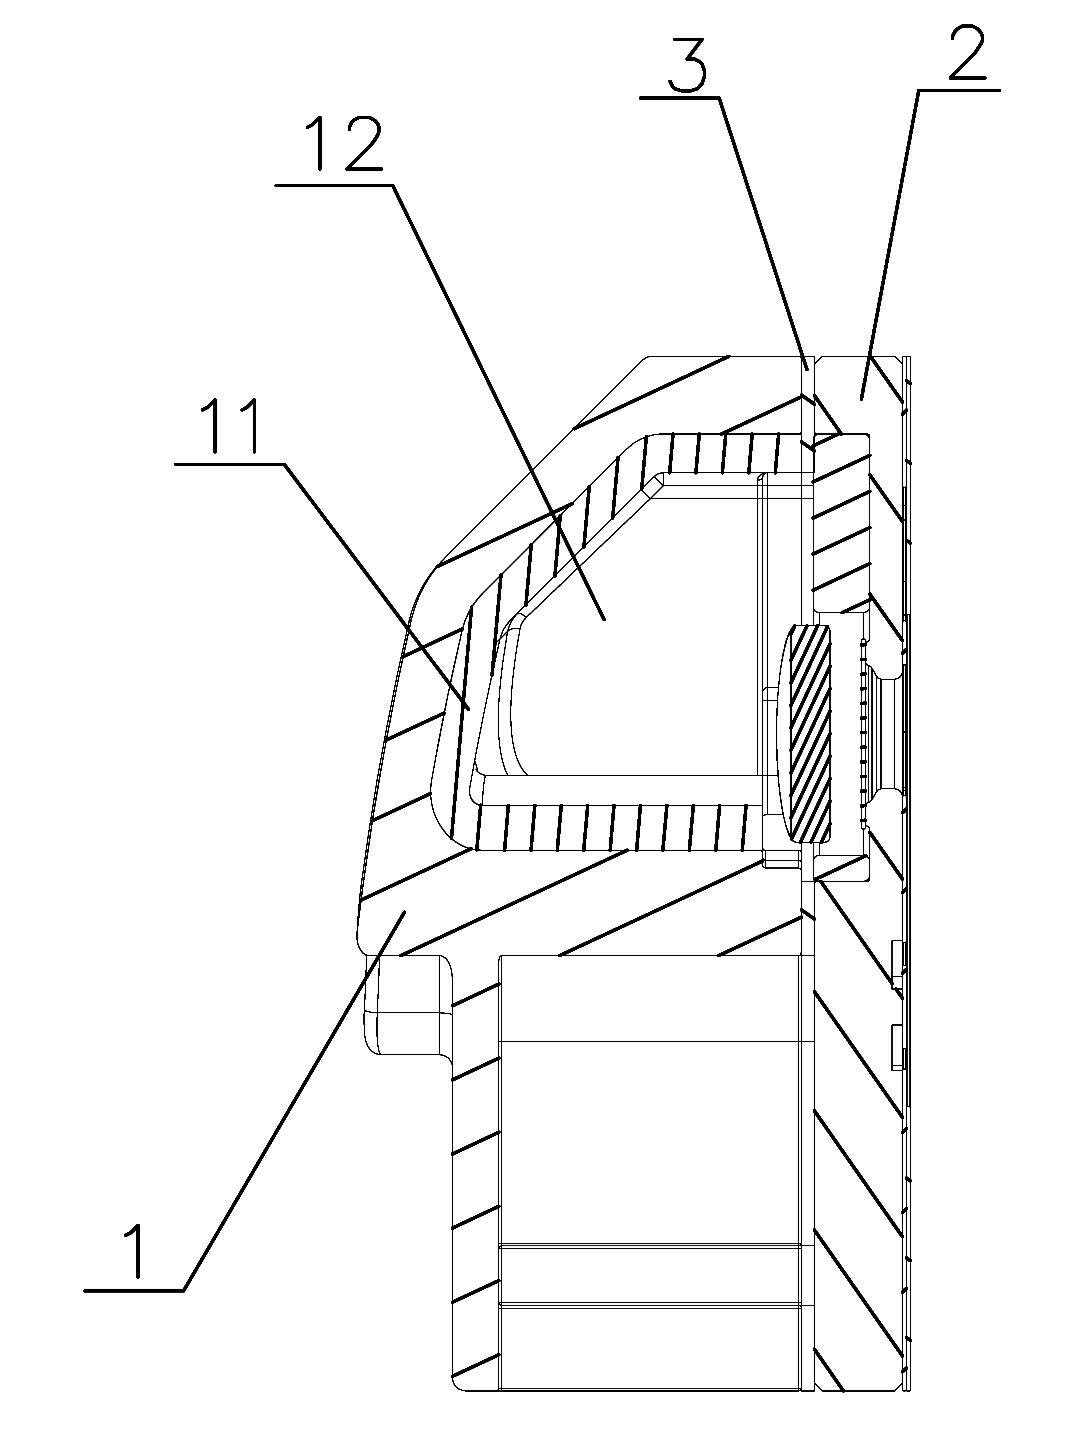 Exhausting and sound deadening structure of refrigerator compressor